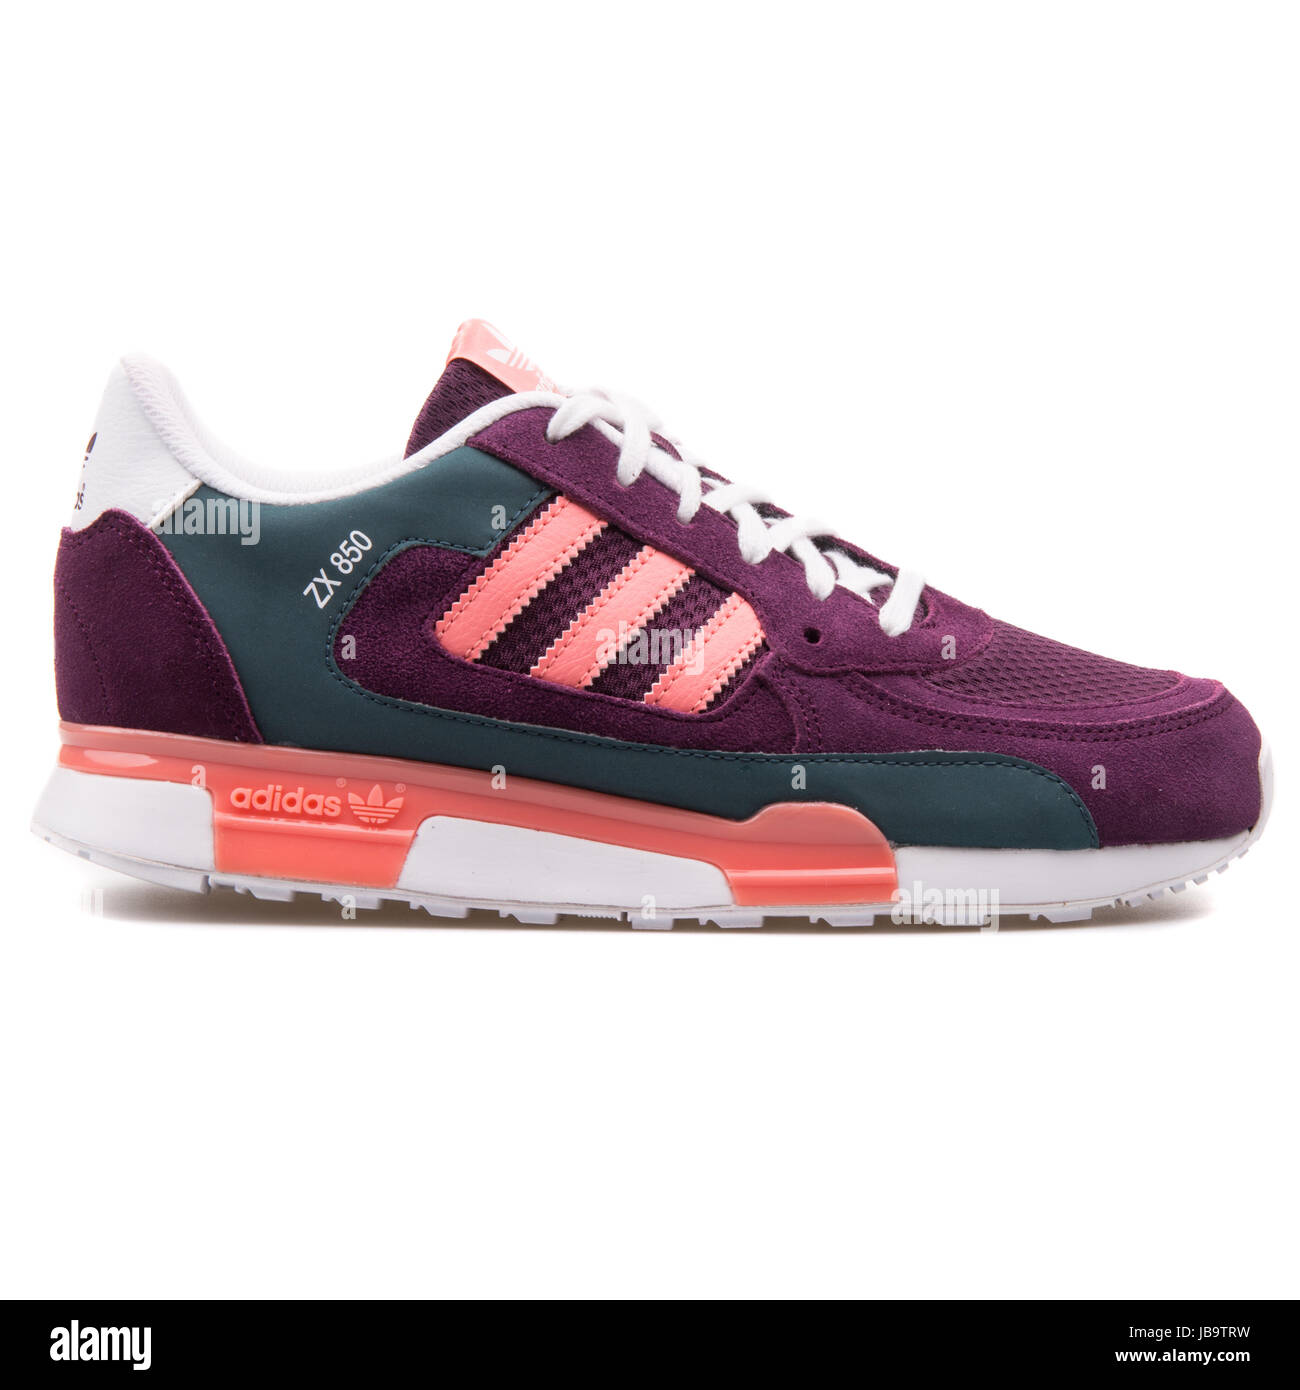 Deltage Tegne Minearbejder Adidas ZX 850 K Merlot Pink Youth's Sports Sneakers - B25563 Stock Photo -  Alamy